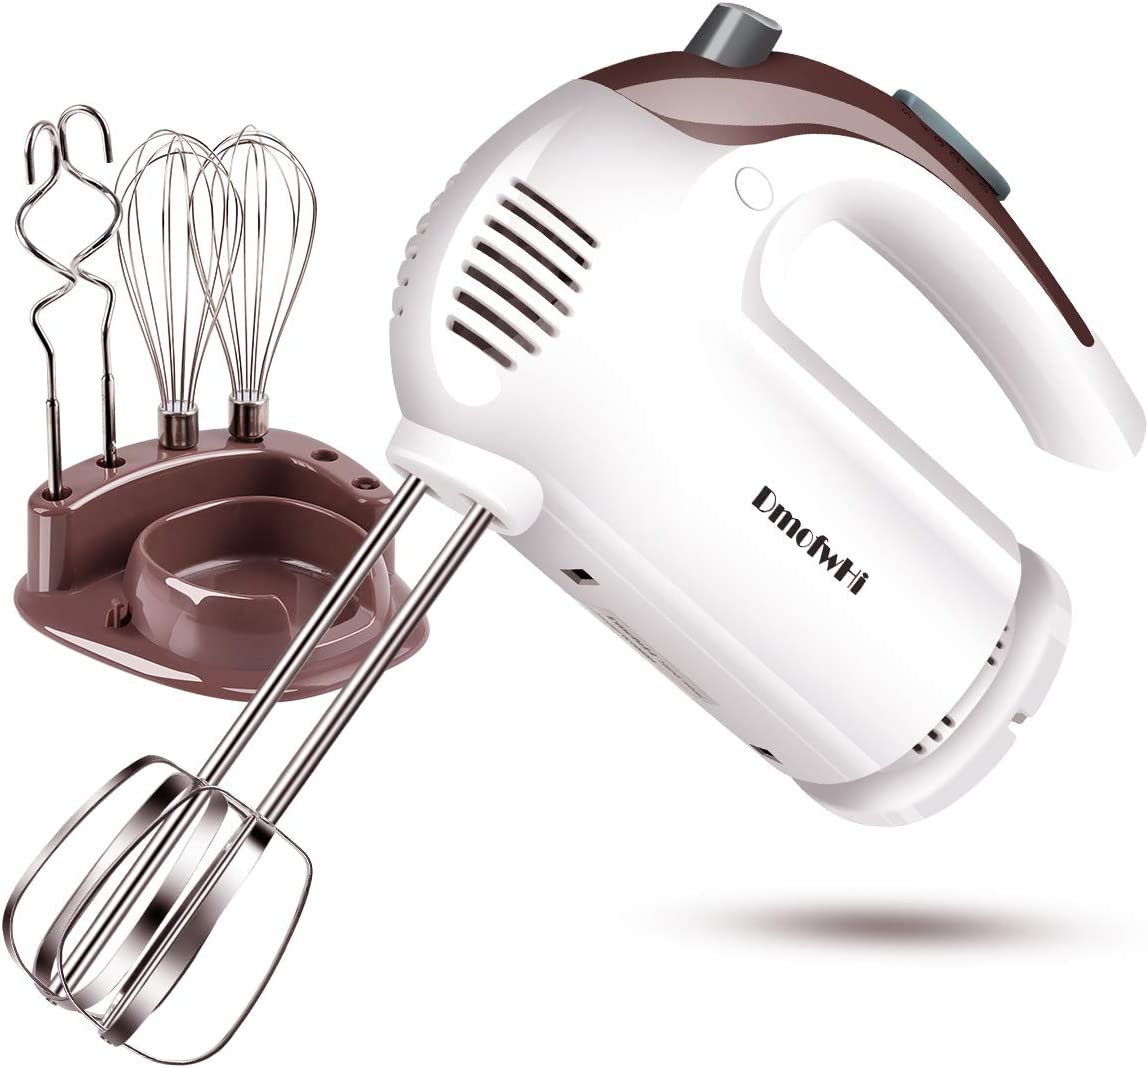  2. DmofwHi 5 Speed Hand Mixer Electric, 300W Ultra Power Kitchen Hand Mixers 